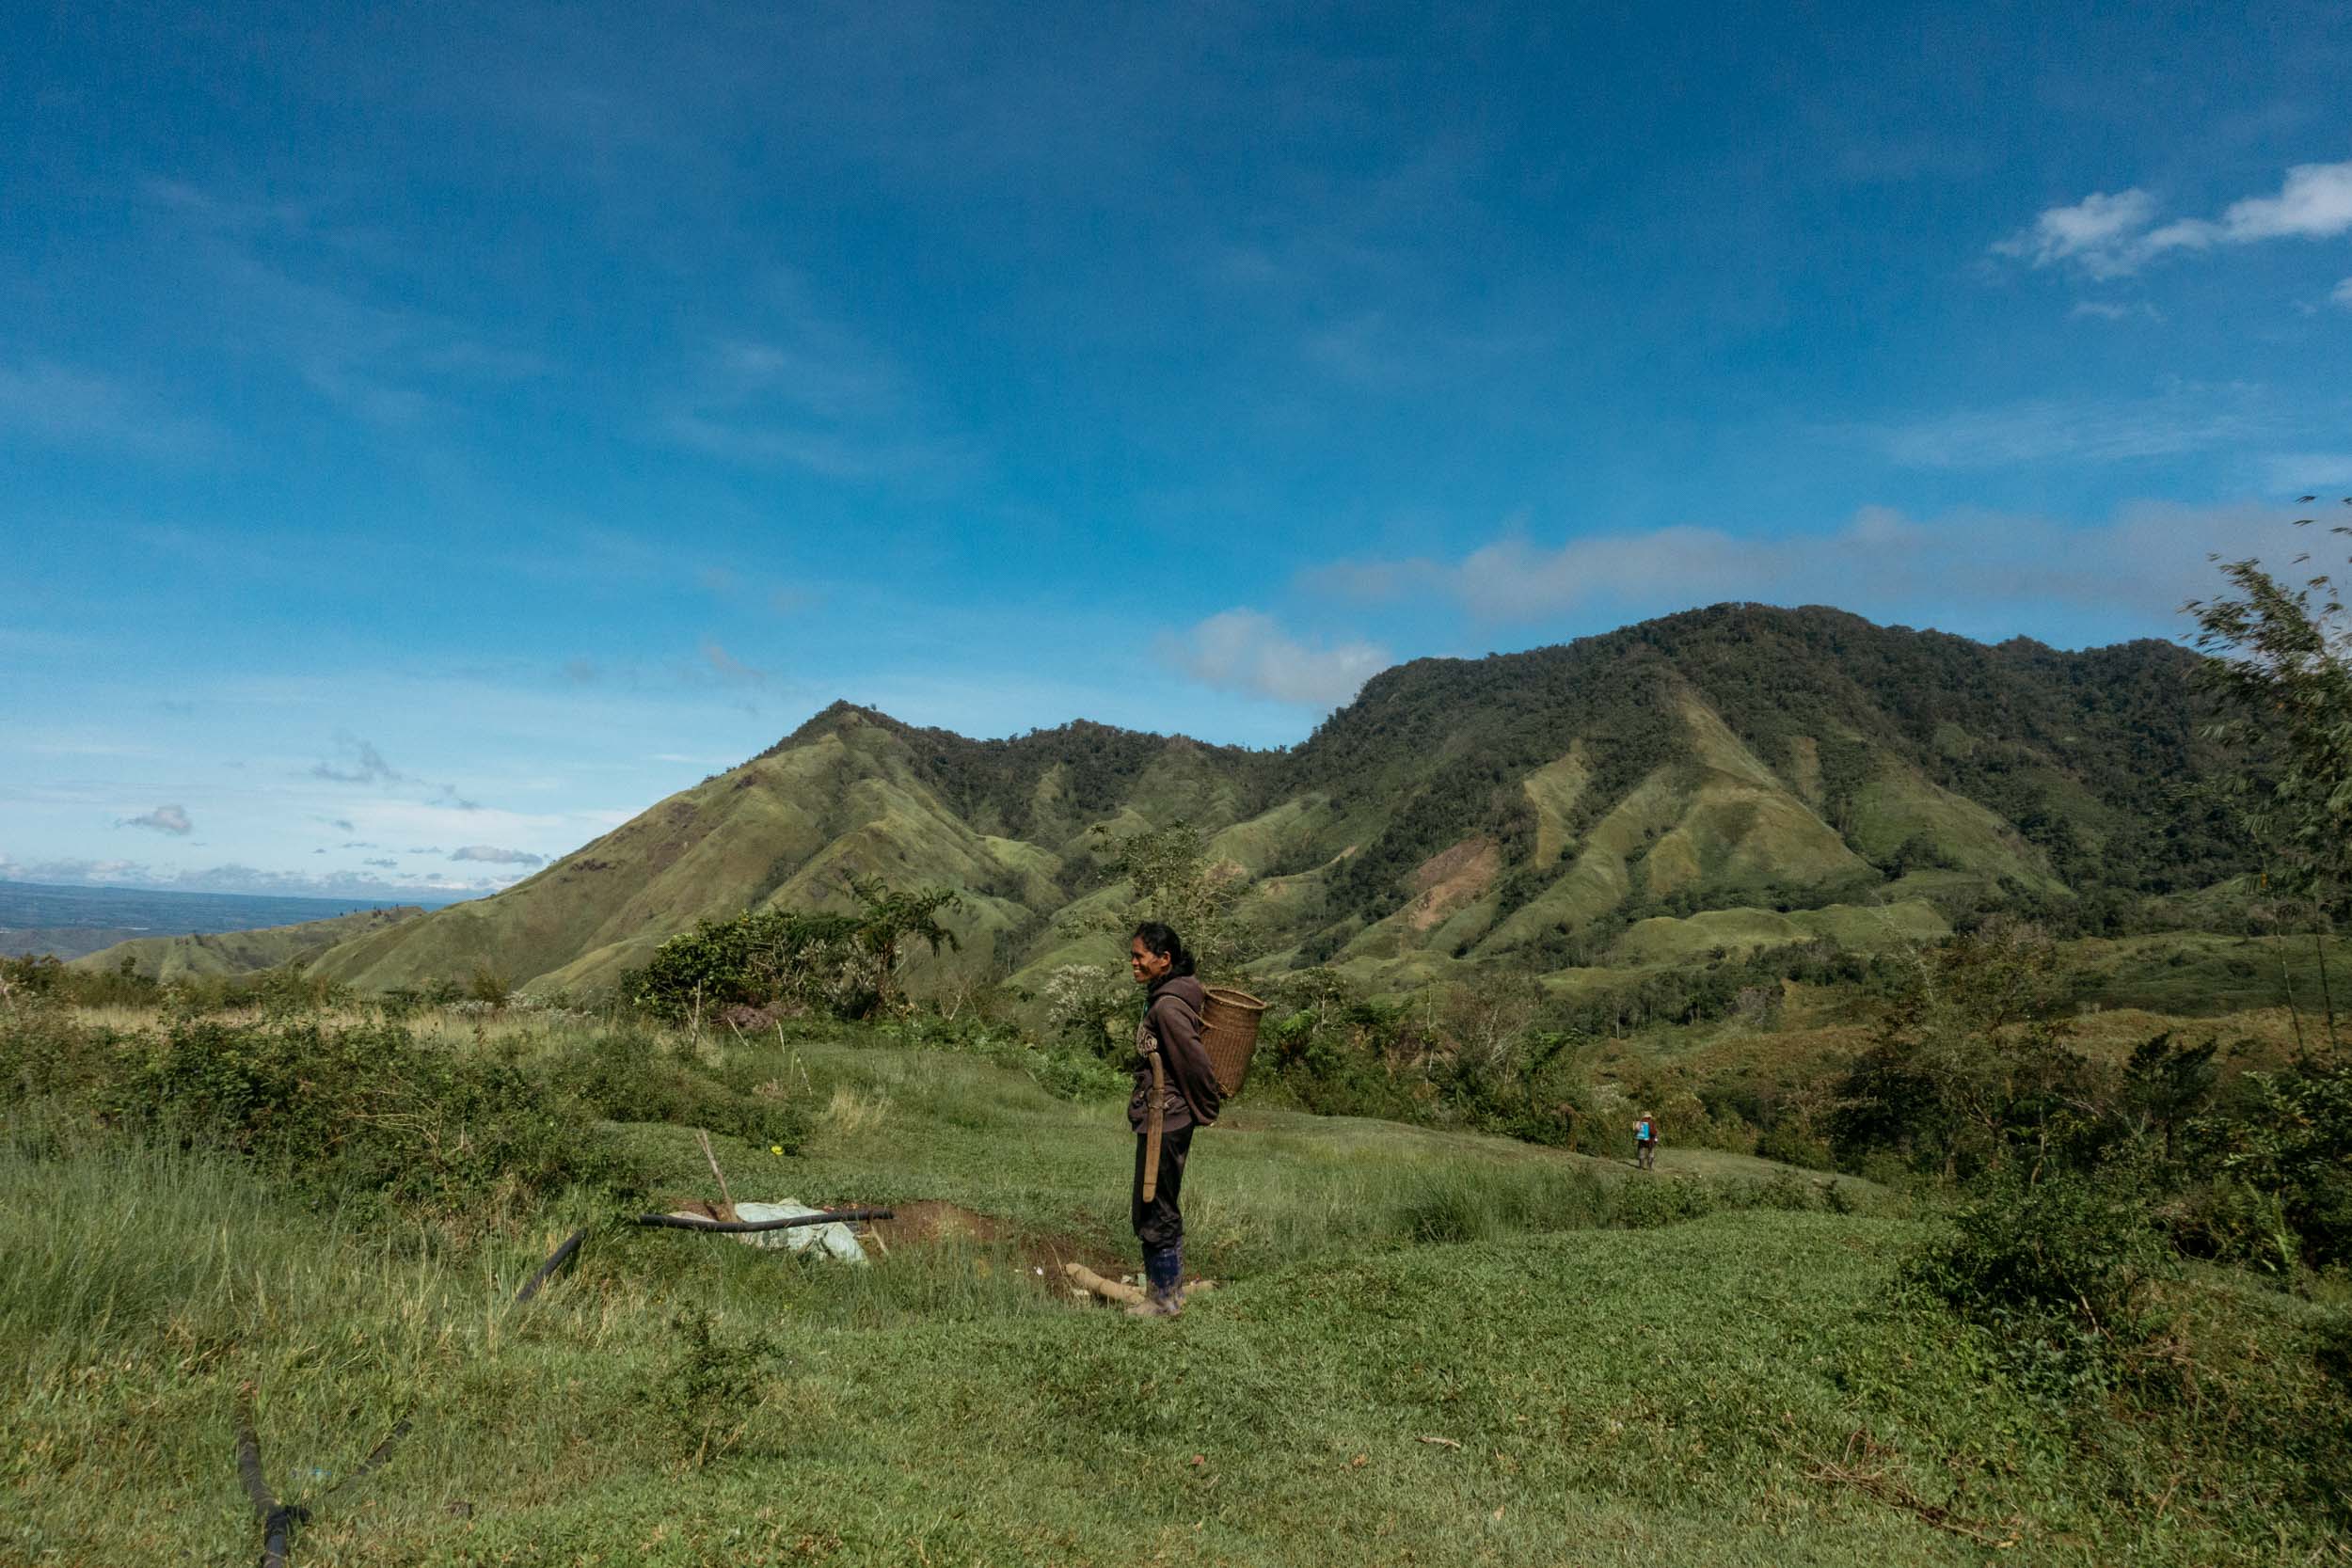  The community of Sitio Manalog, Bukidnon composed&nbsp;of 222 households take pleasure in&nbsp;being surrounded by the mountainous view of Mt. Kitanglad rage. 